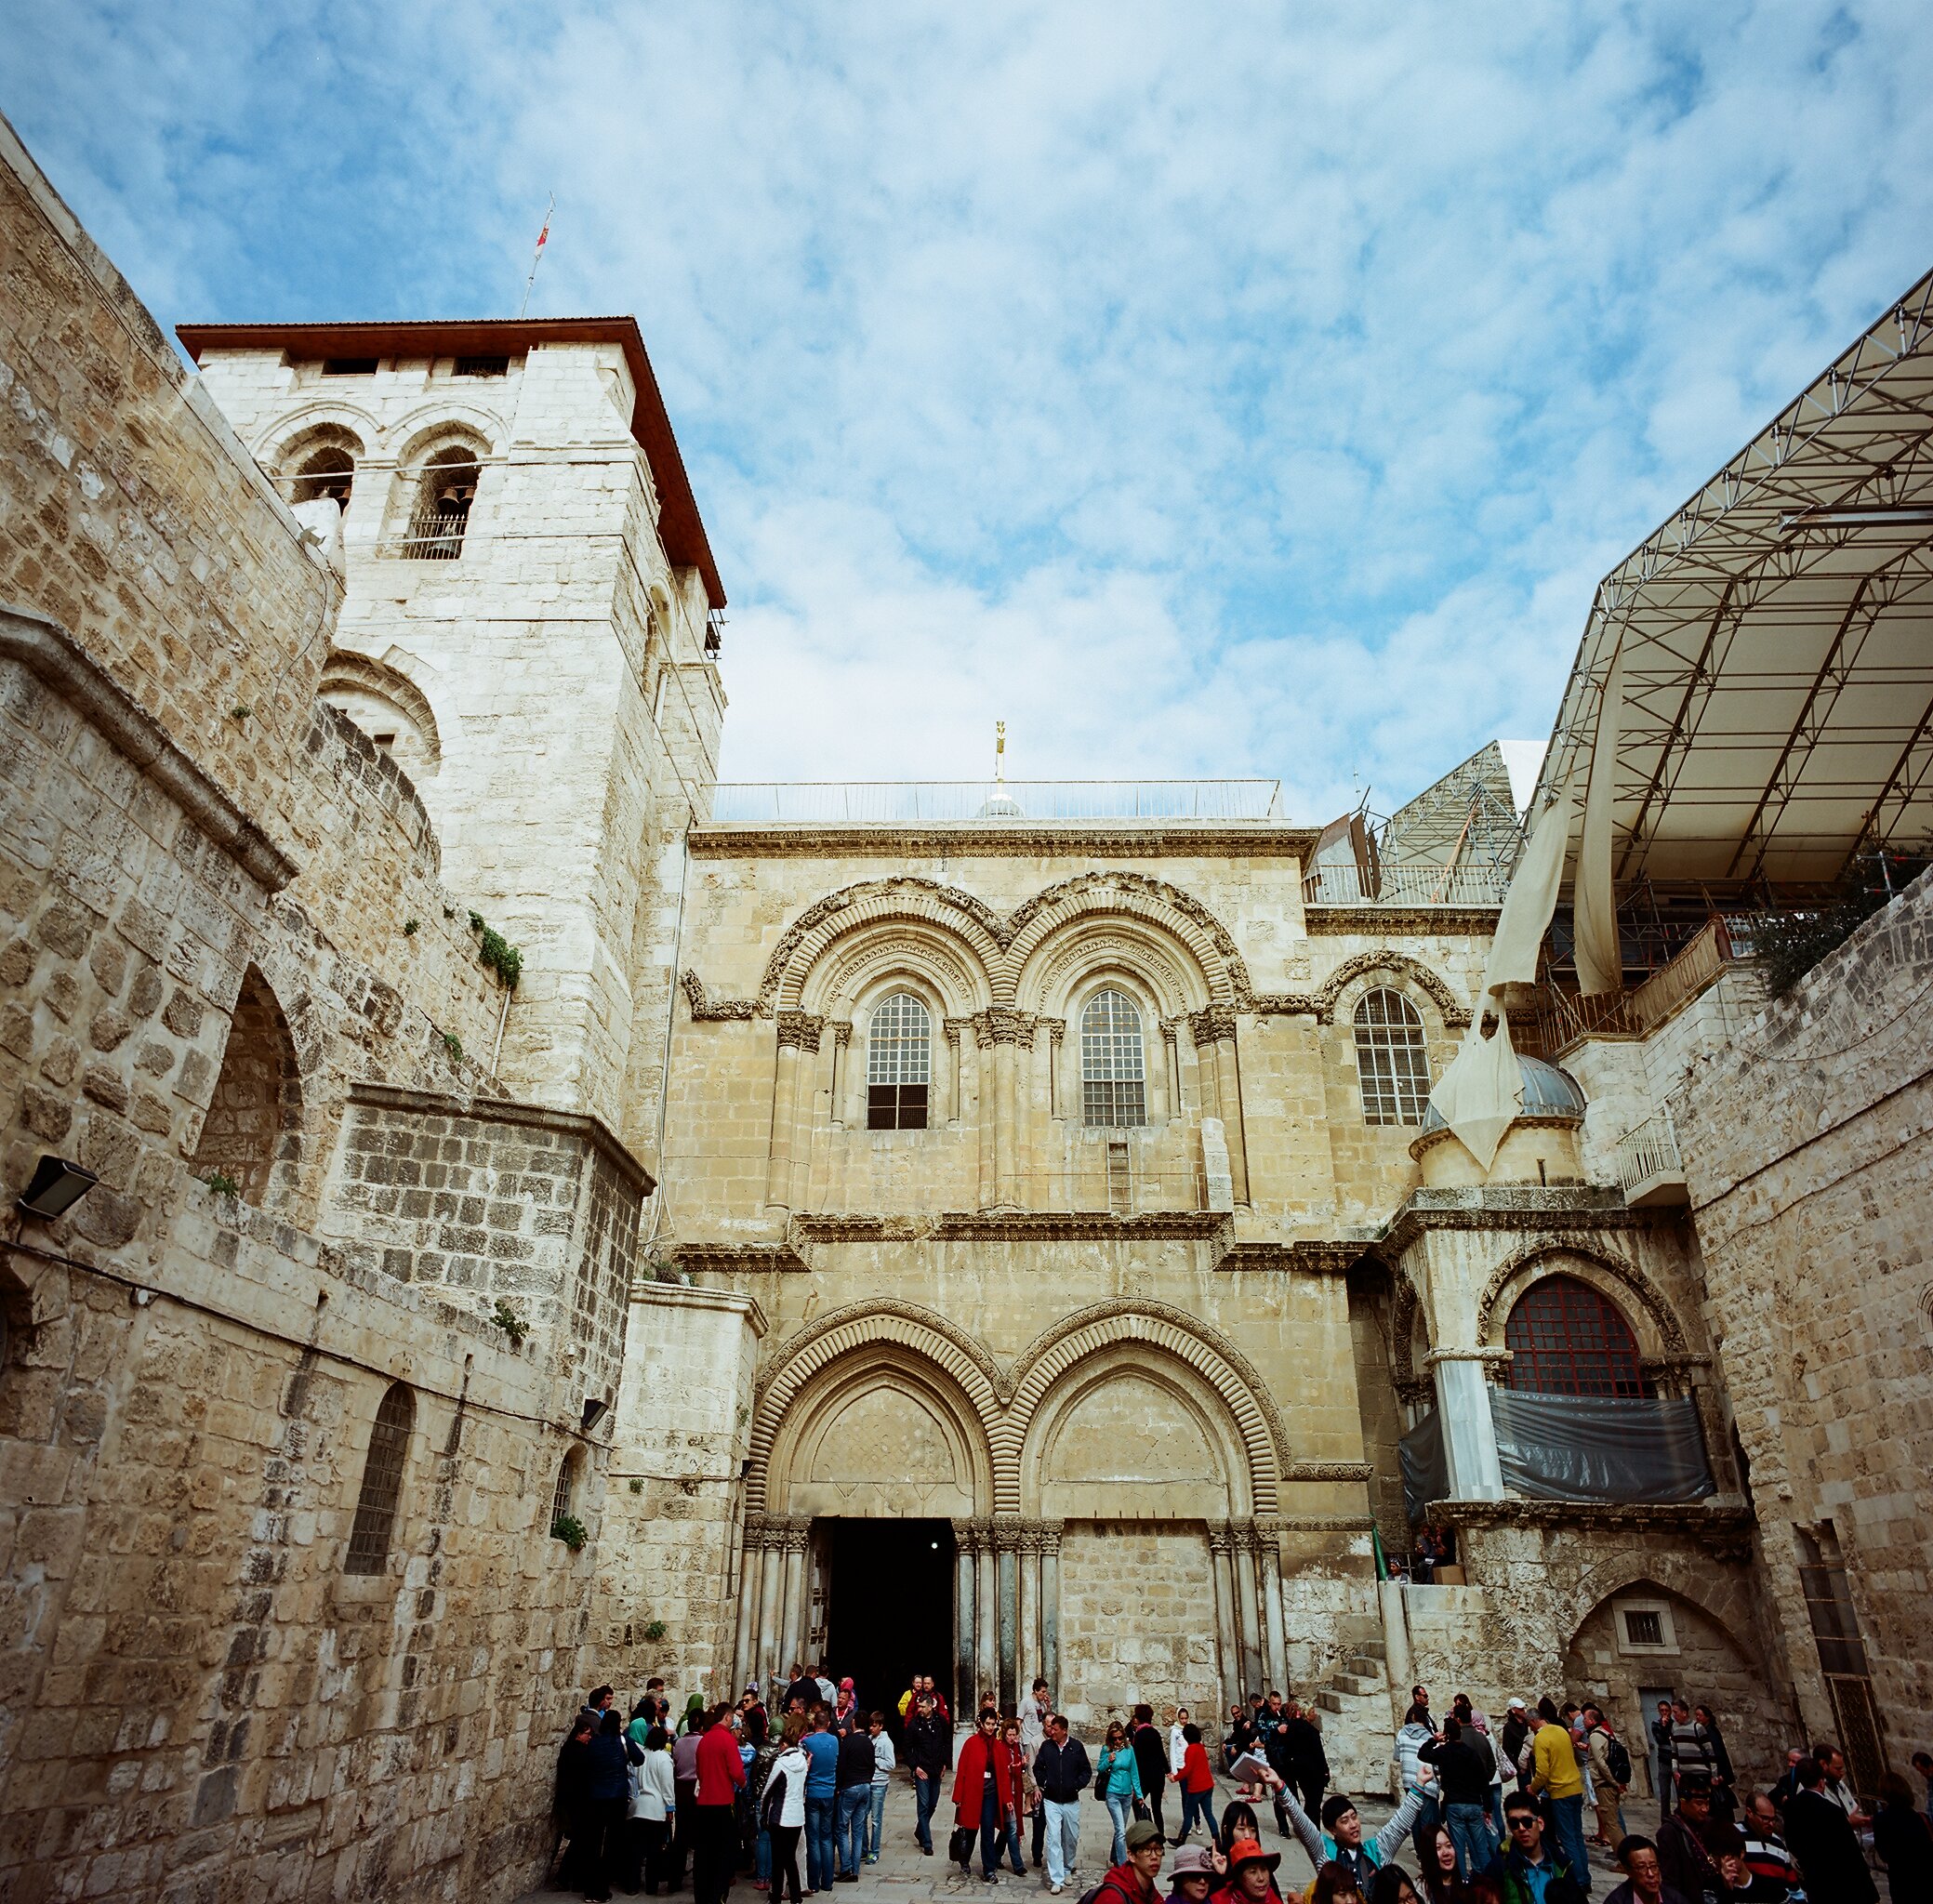 Church of the Holy Sepulchre south entrance, Jerusalem, Israel.